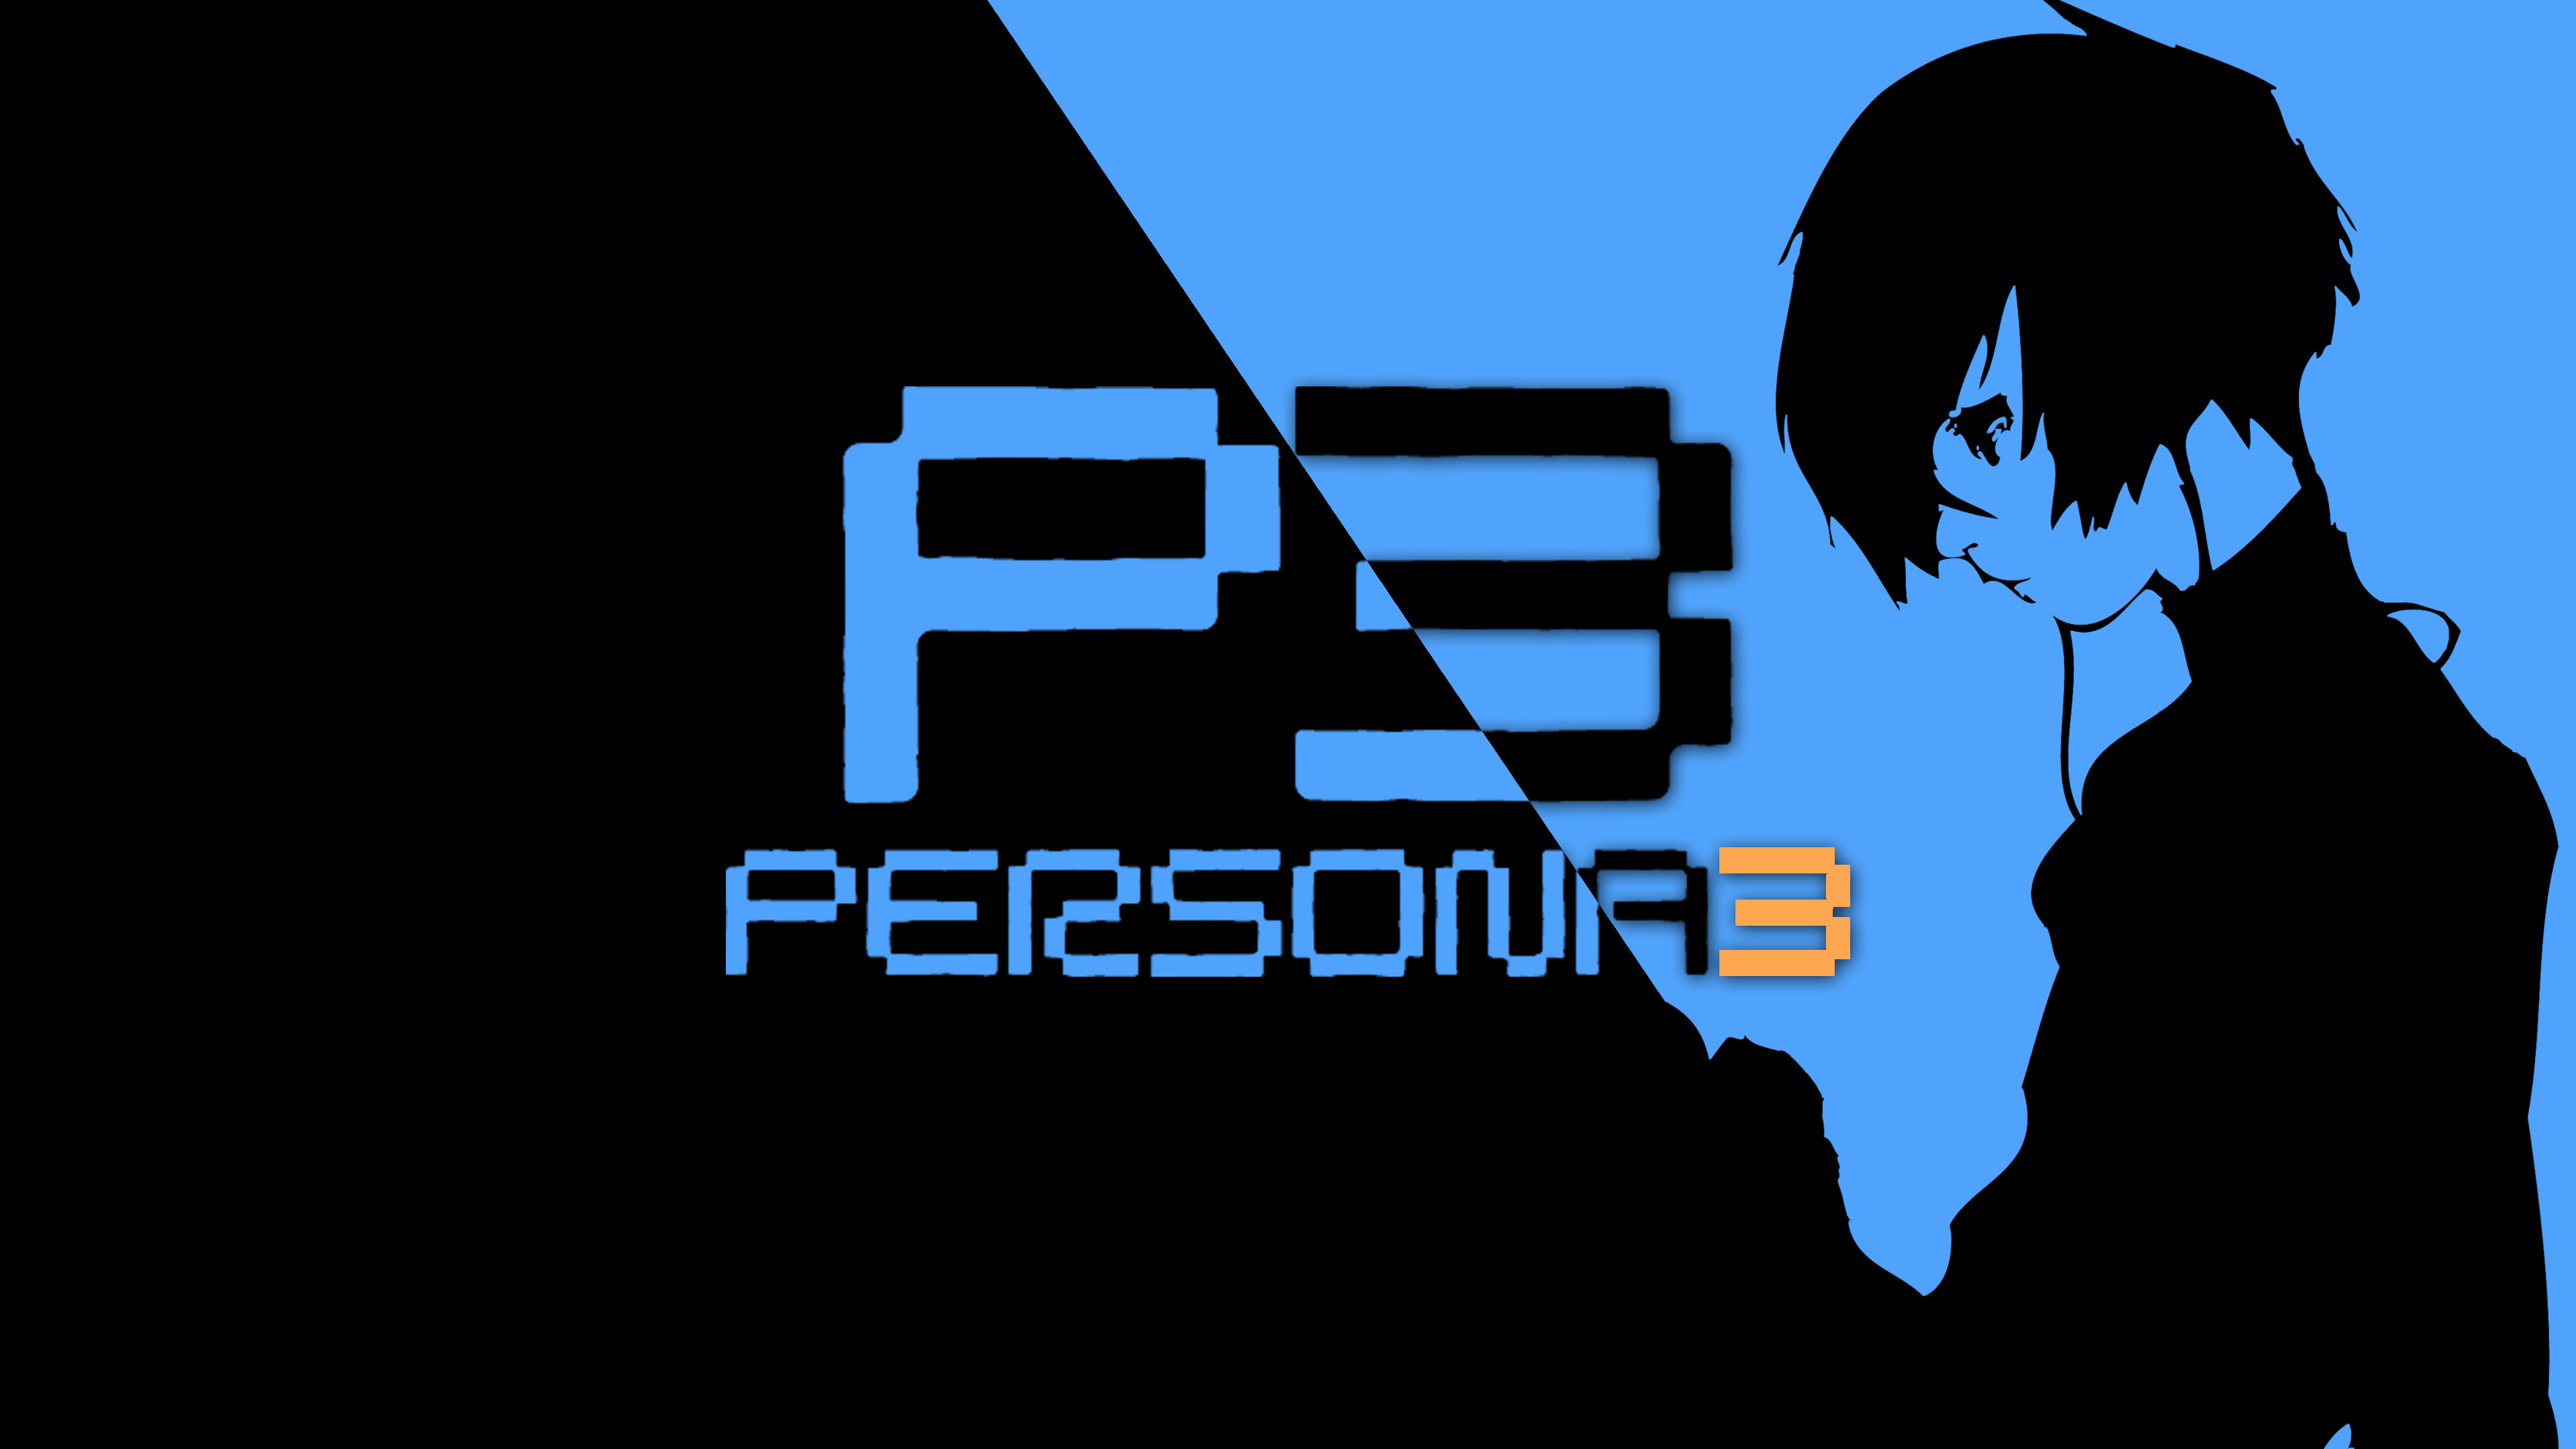 You should check out my older P3 wallpaper, which is arguably way better  than this one.